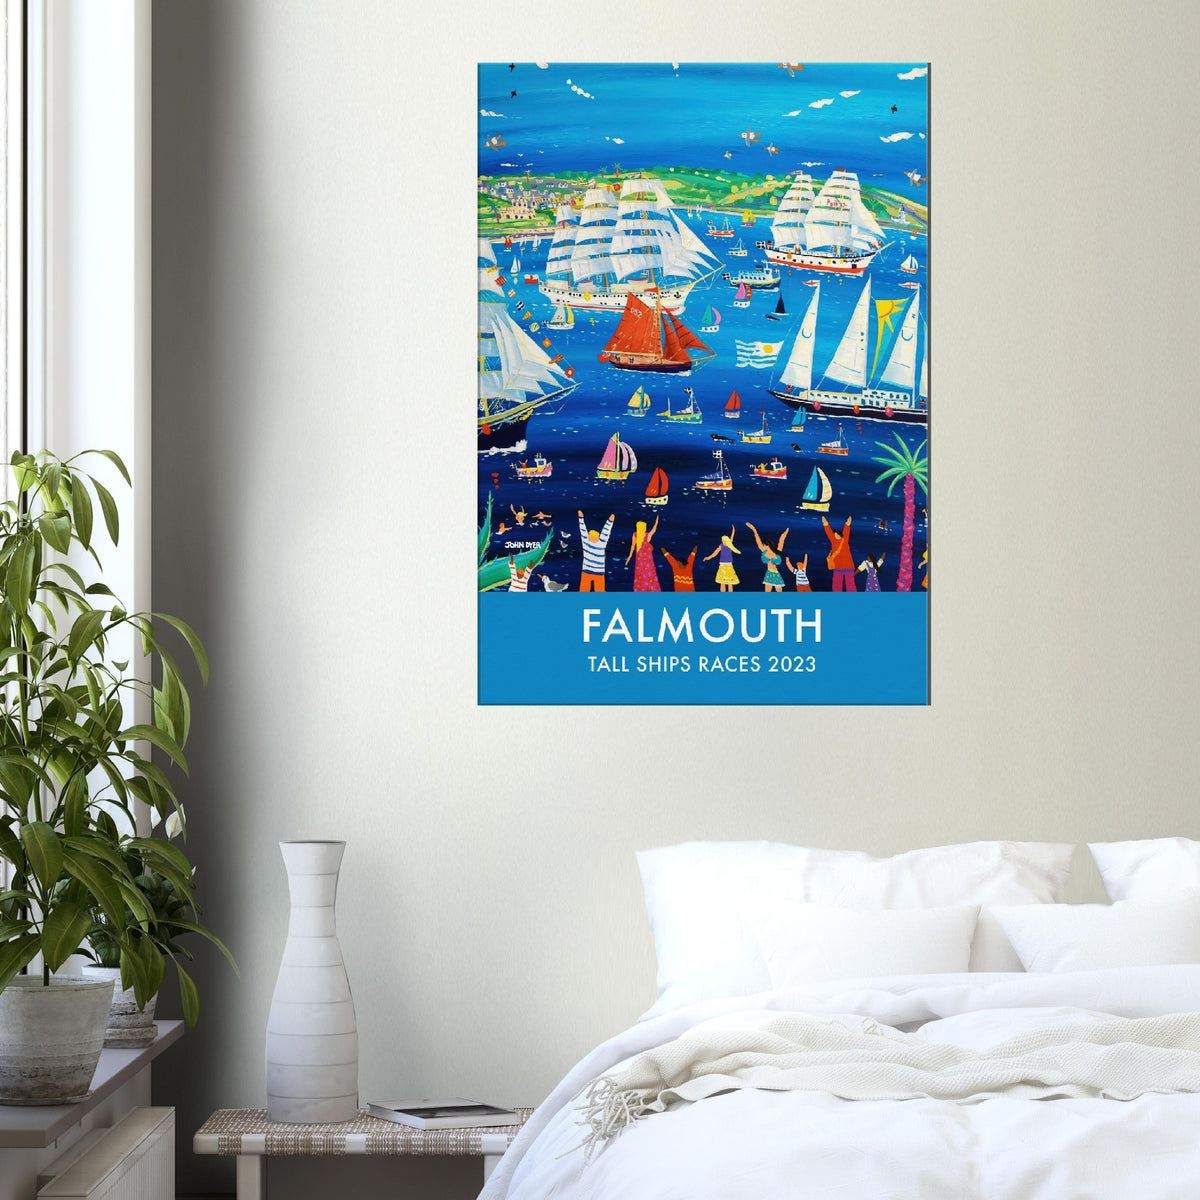 Canvas Art Print by John Dyer of the Falmouth Tall Ships Races 2023 from our Cornwall Art Gallery